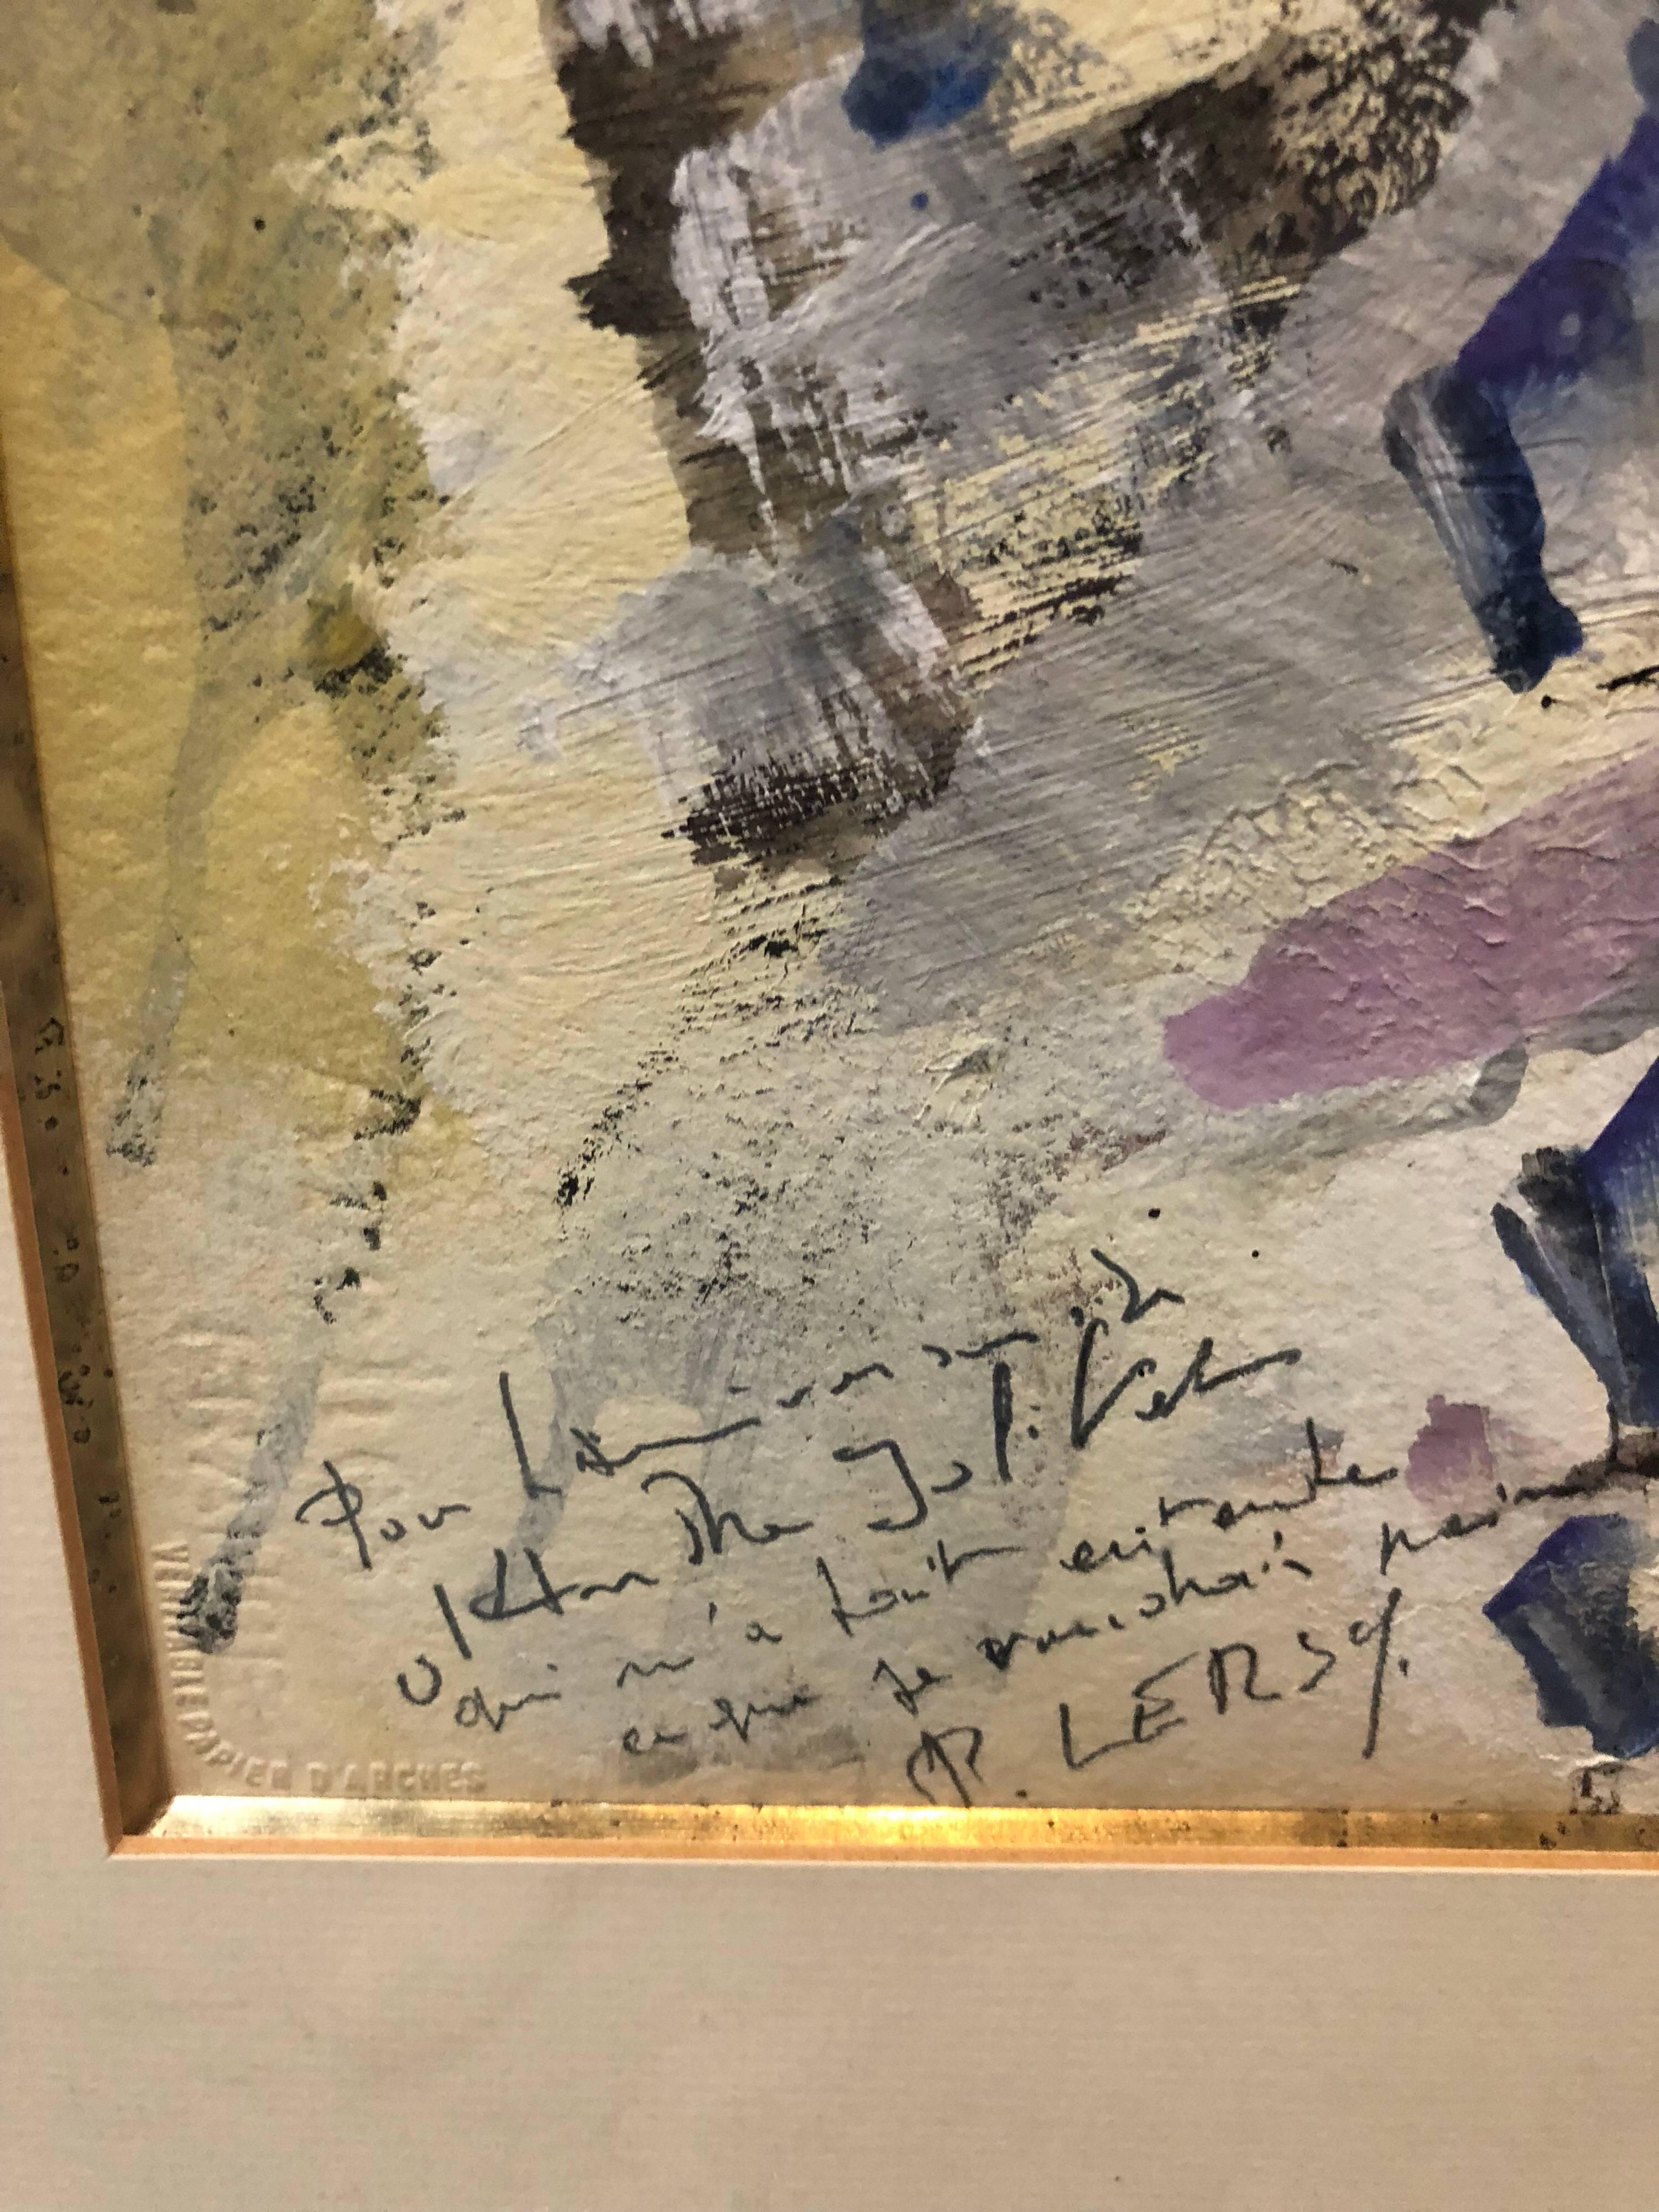 Signed, R. Lersy, dated 1964 lower right and bearing personal inscription lower left. Acrylic and Oil on Paper. Measuring 29 1/2